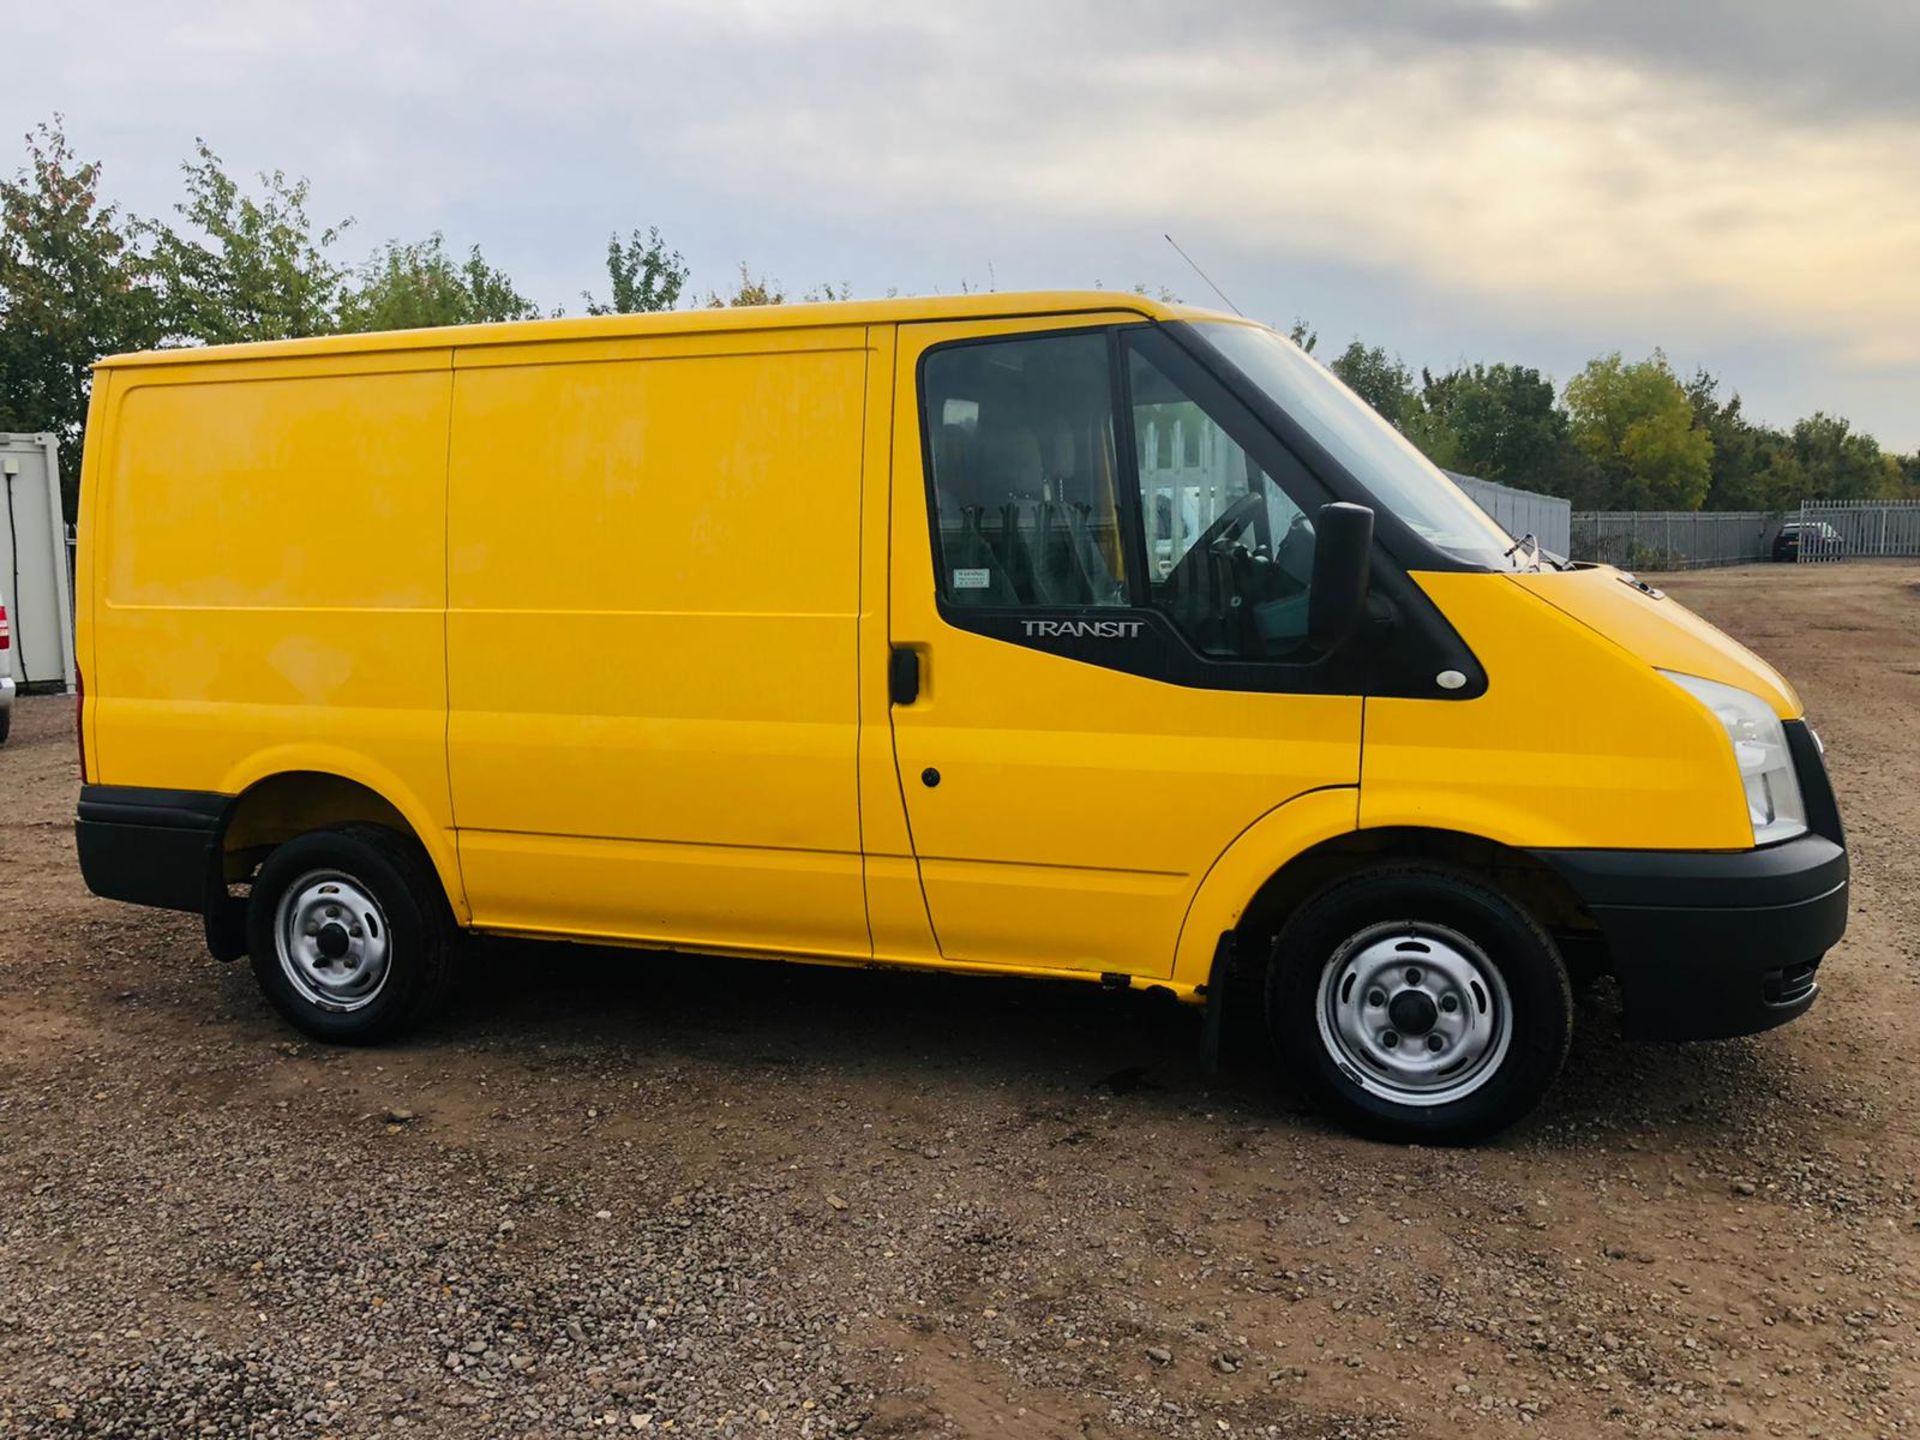 Ford Transit 2.2 TDCI 125 T300 L1 H1 FWD 2011 '61 Reg' Air Con - Elec Pack - No Vat Save 20% - Image 2 of 32